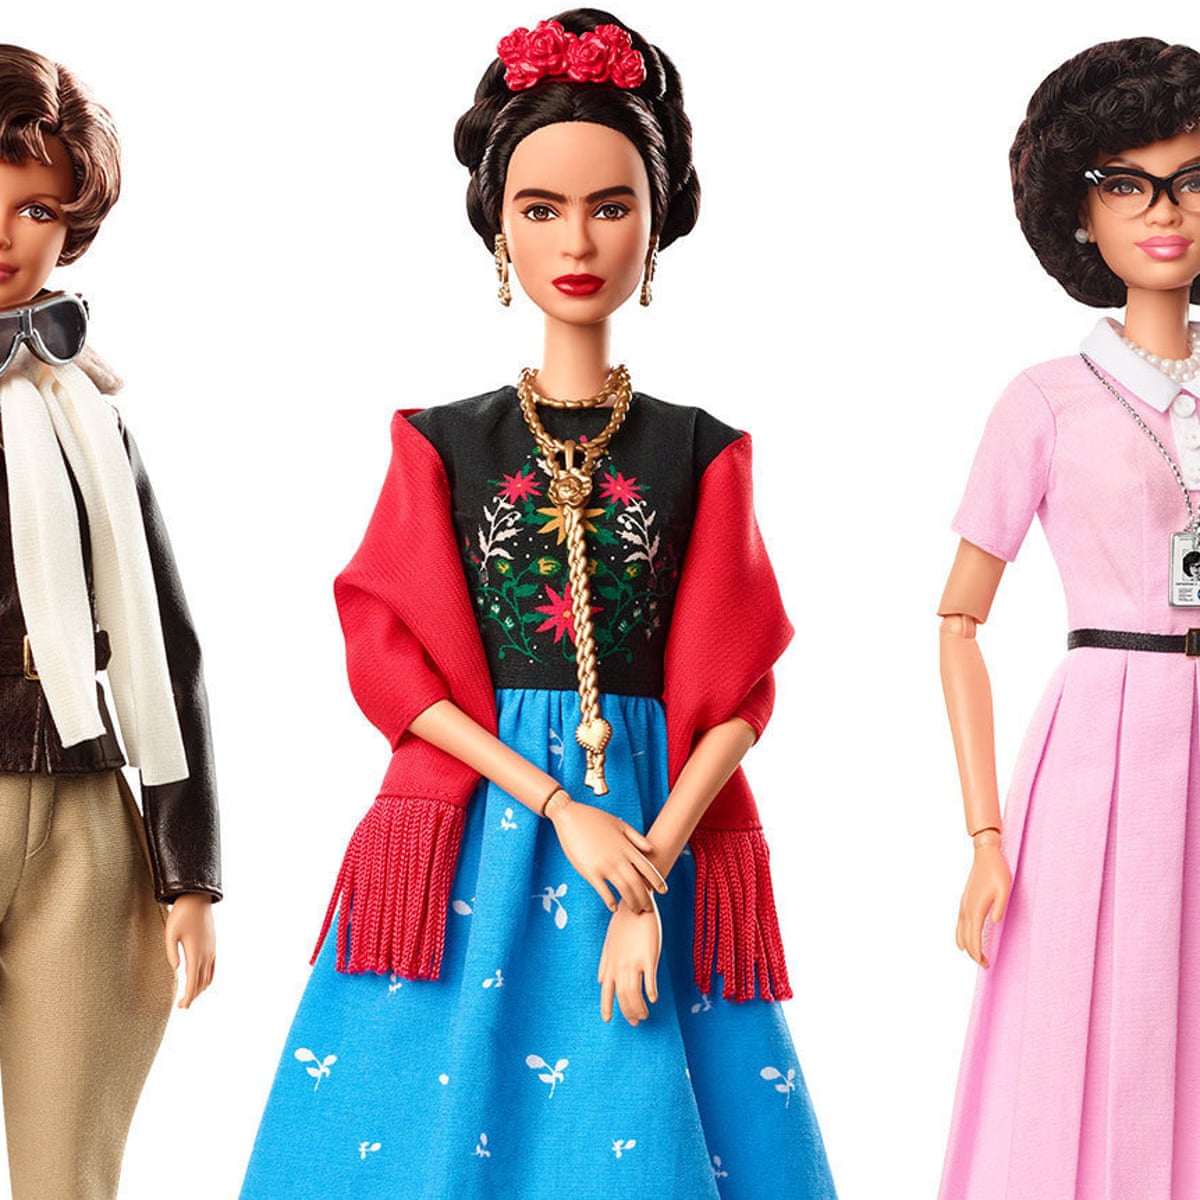 Frida Kahlo's great-niece calls for Barbie doll to be redesigned ...